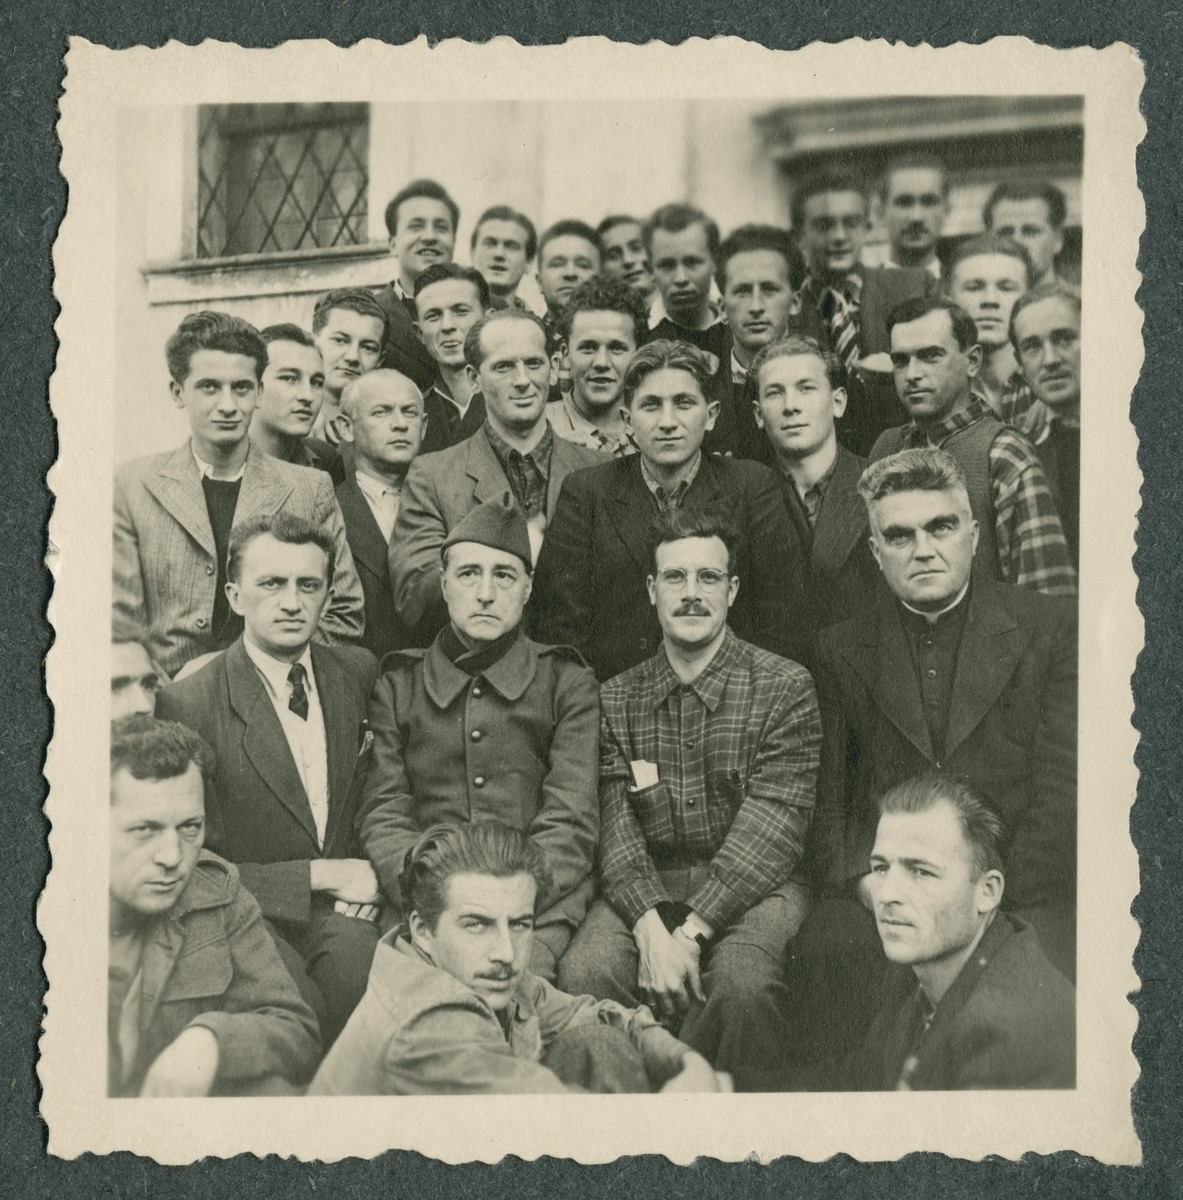 Group portrait of prisoners in Ilag VII, a camp for foreign nationals.

The man in the middle wearing the cap was a prisoner interpreter who could speak to the German authorities.  Father Sledz is in the priest's habit in the second row on the right